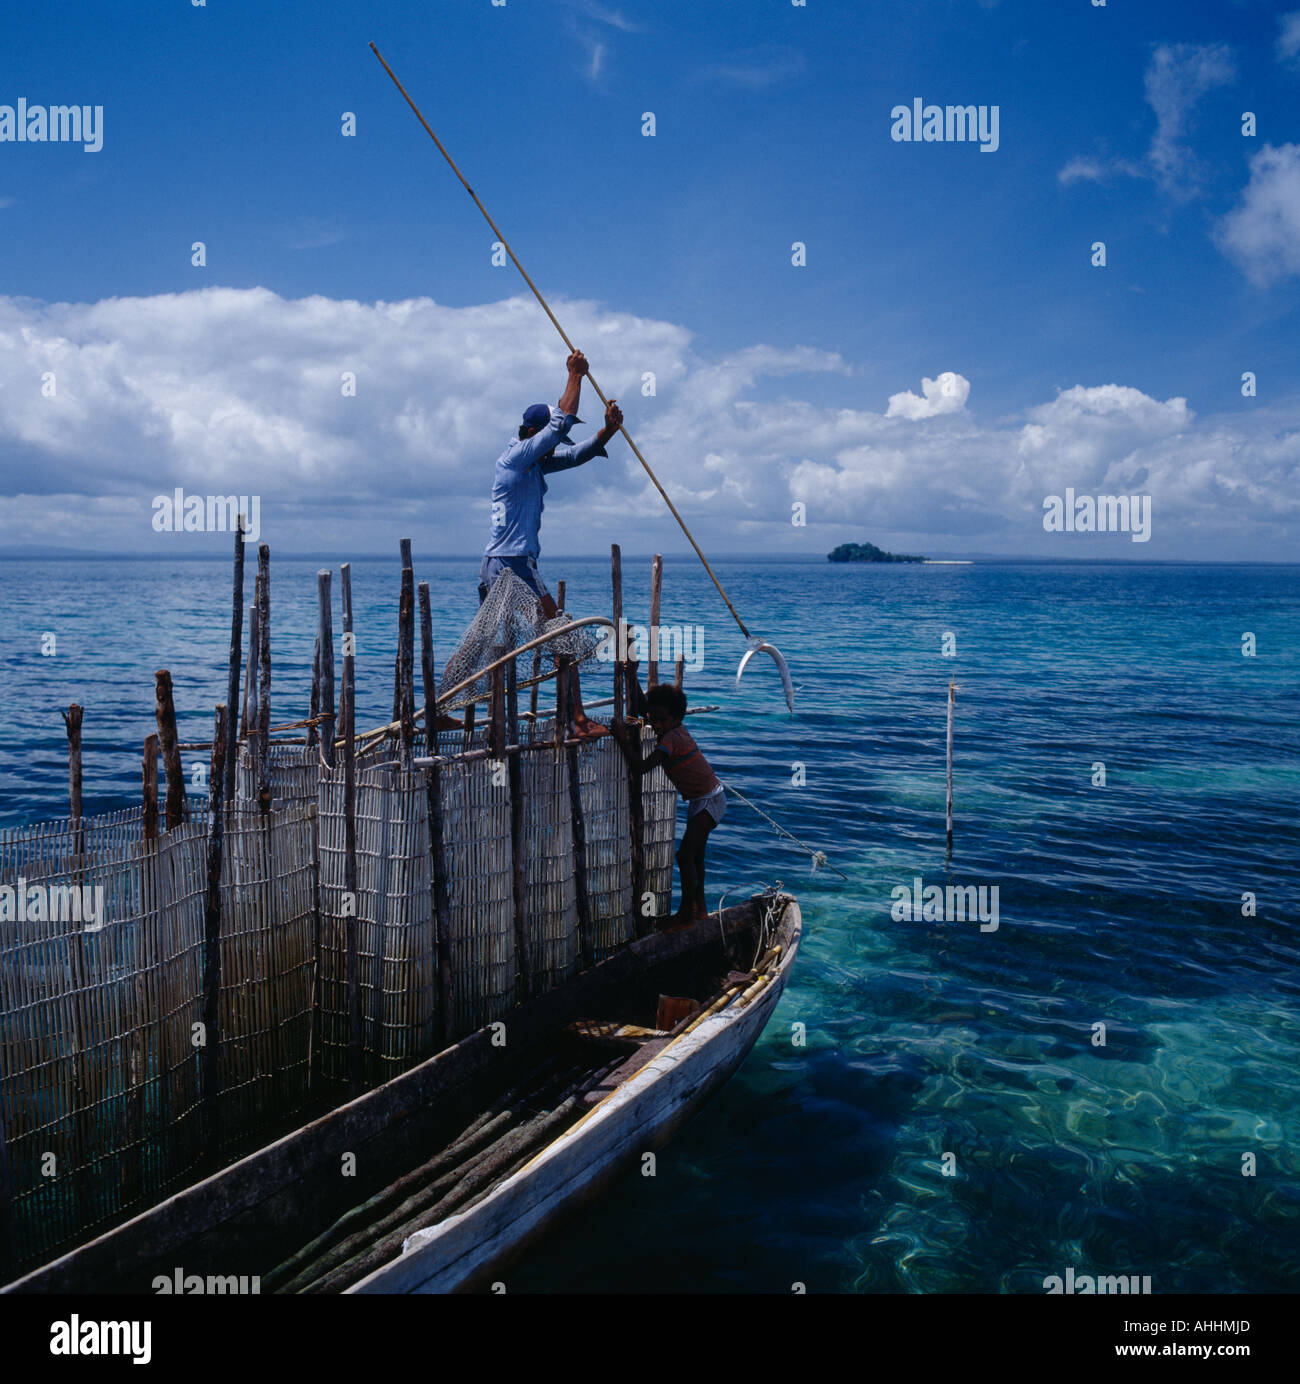 INDONESIA Southeast Asia Irian Jaya Sorong Fisherman on fishtrap by boat spearing fish in clear water with a long pole. Stock Photo